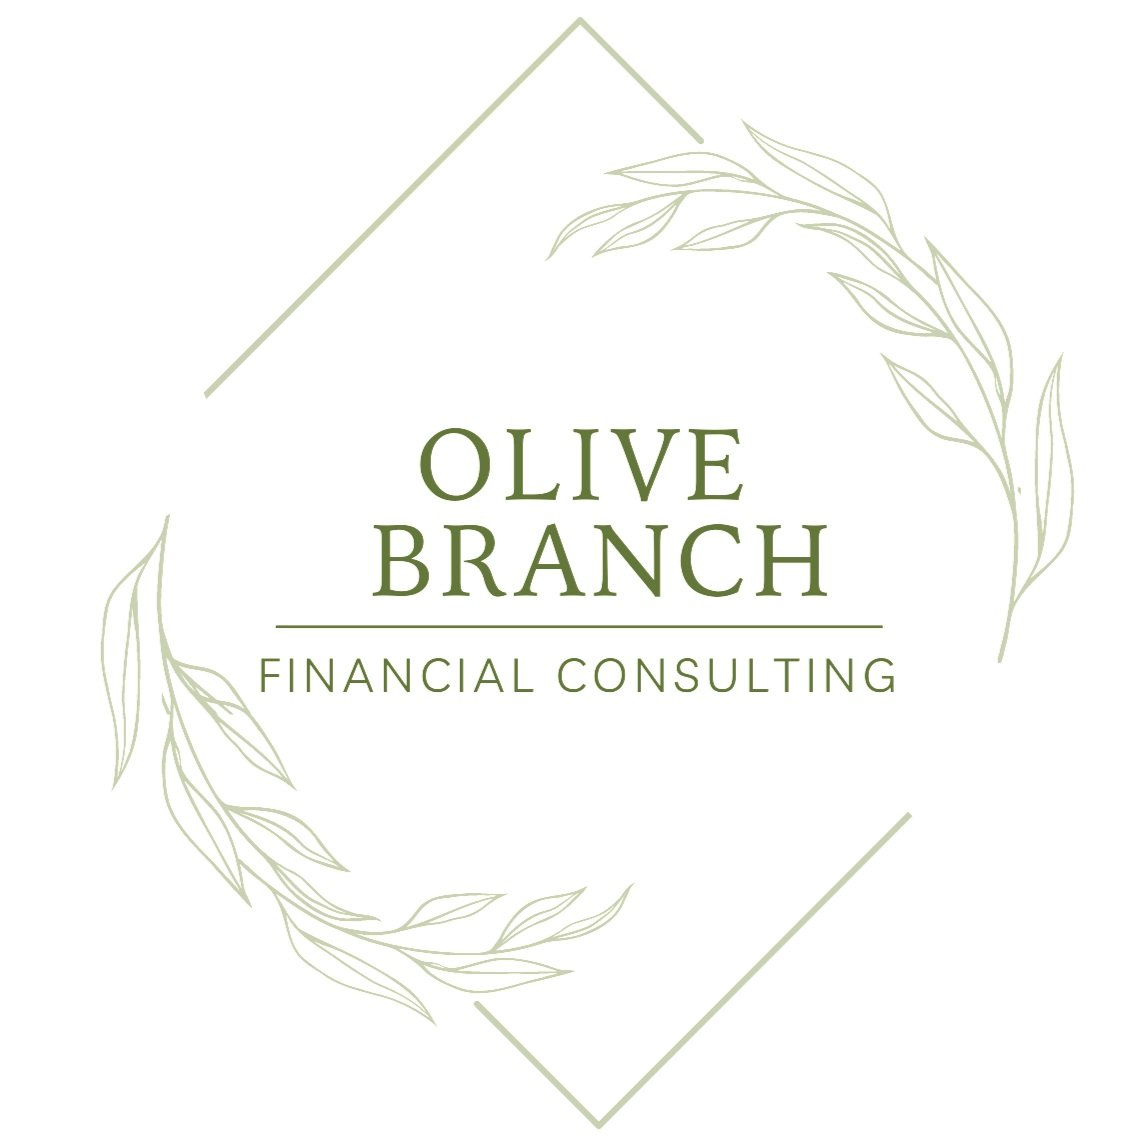 Olive Branch Financial Consulting